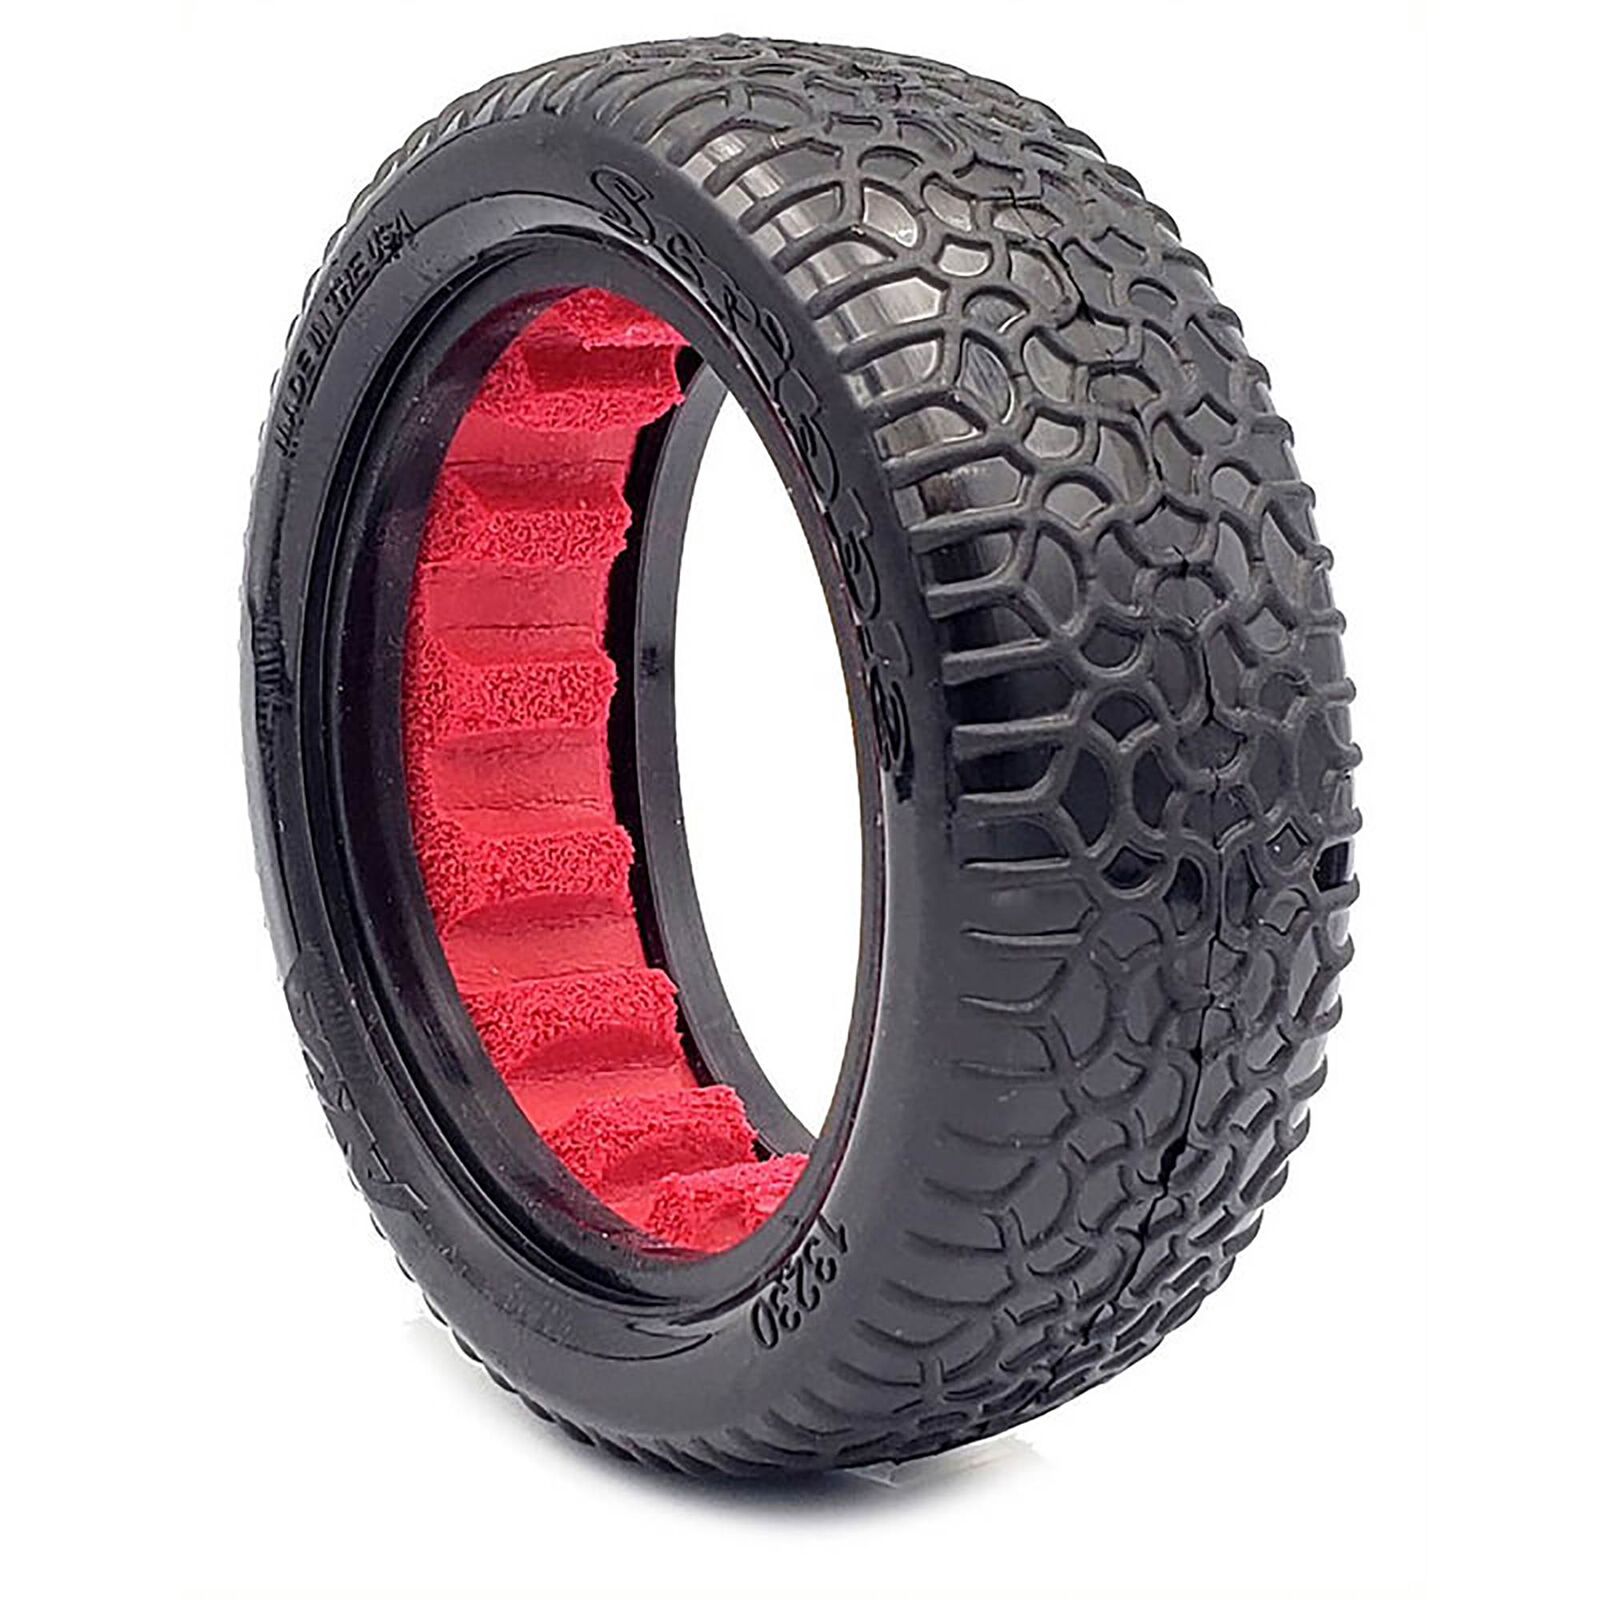 1/10 Scribble Front 2WD 2.2 Super Soft Long Wear Tires, Red Inserts (2): Buggy